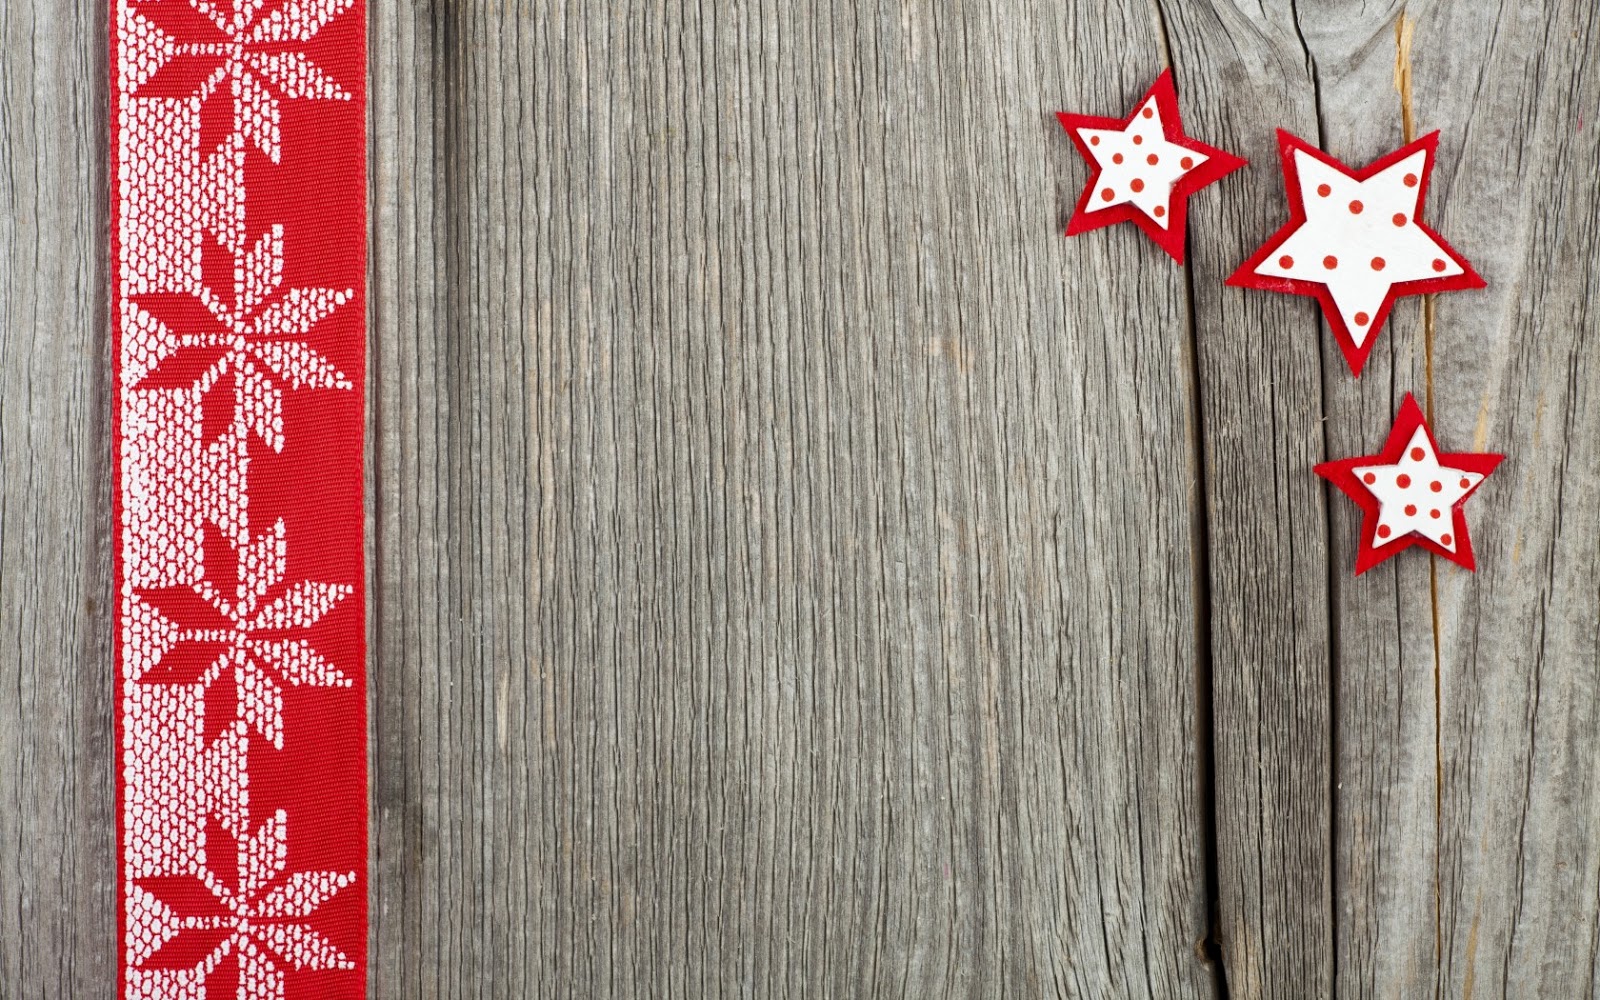 holz wallpaper,red,banner,wood,tree,flag